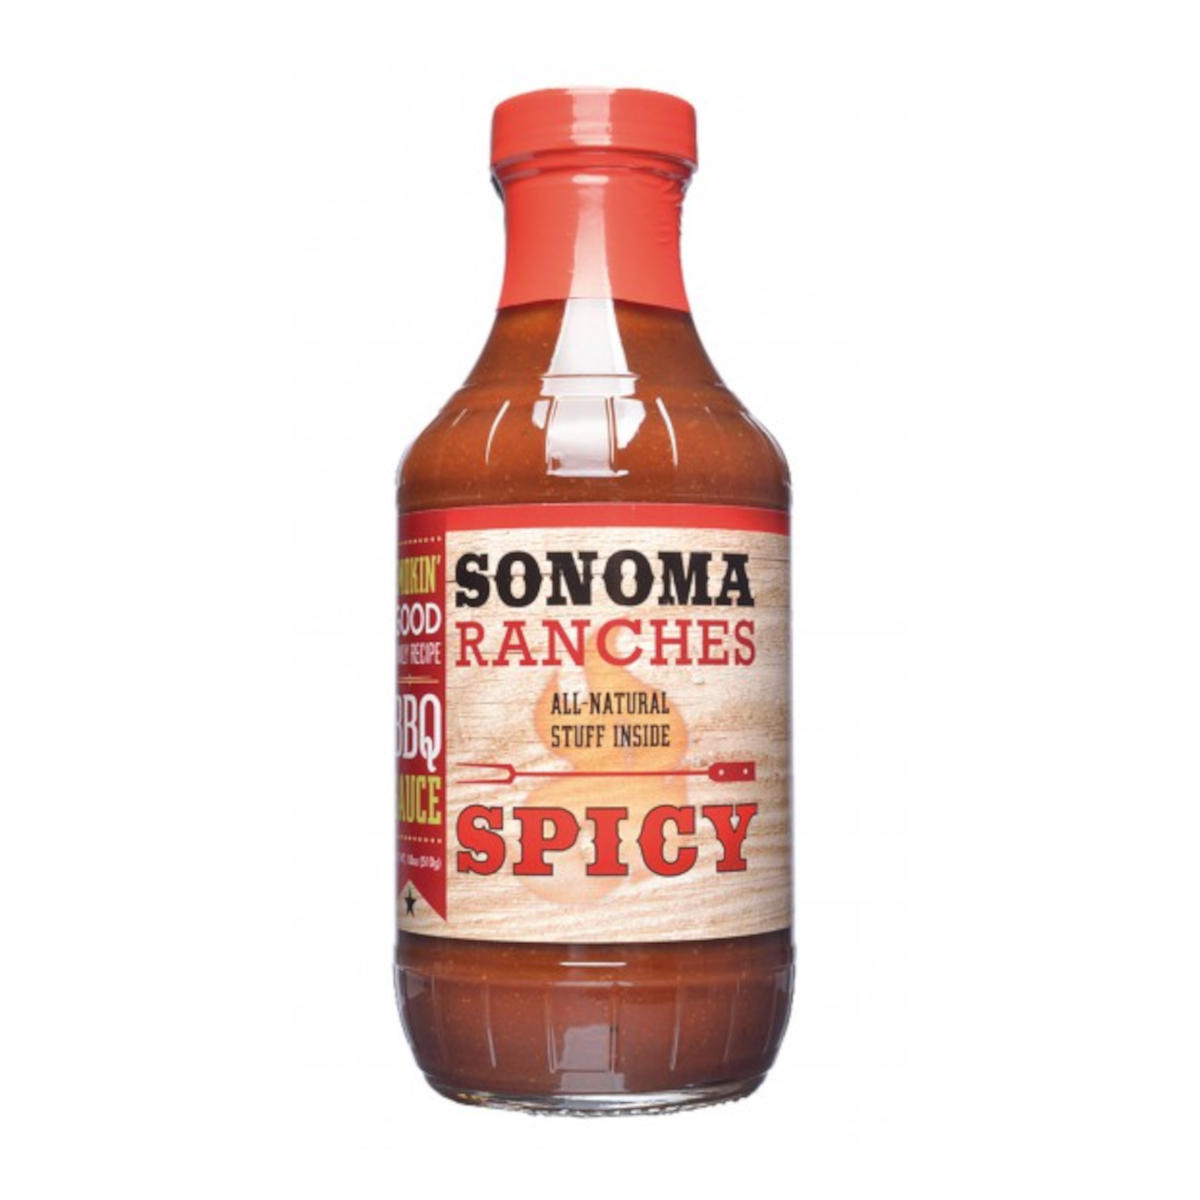 Sonoma Ranches Spicy BBQ Sauce 455ml